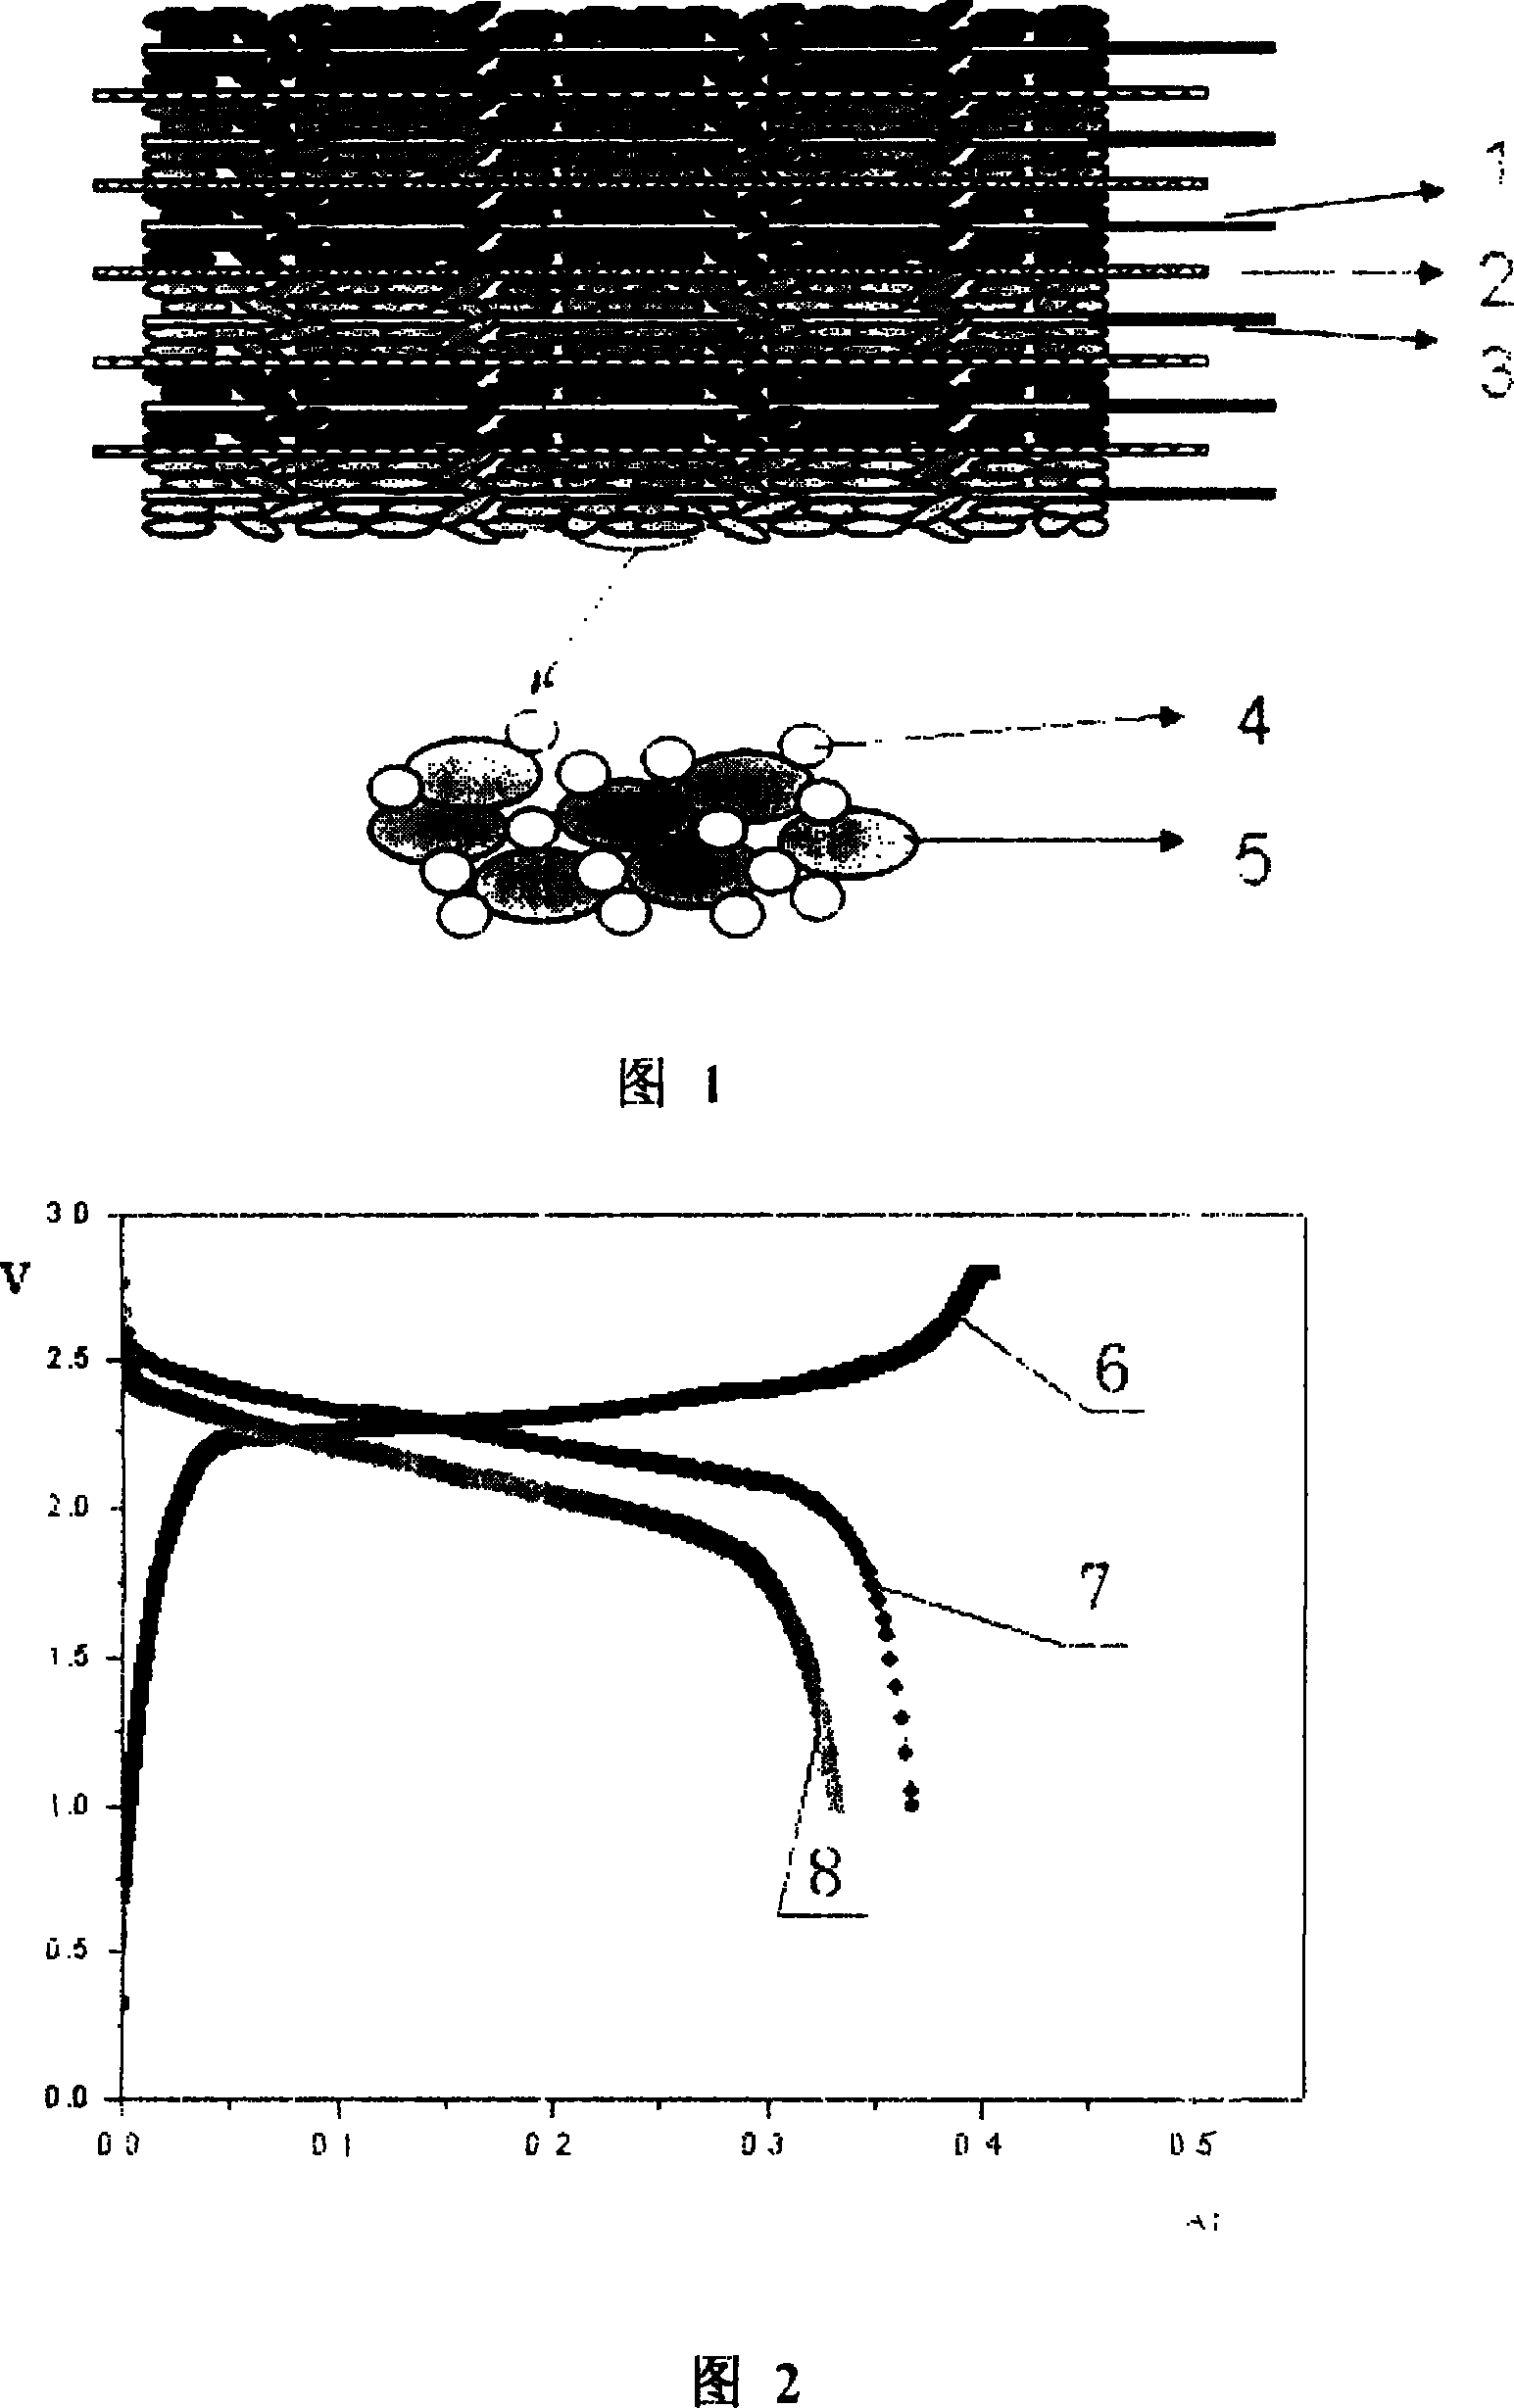 Electro-chemistry energy storing and converting device